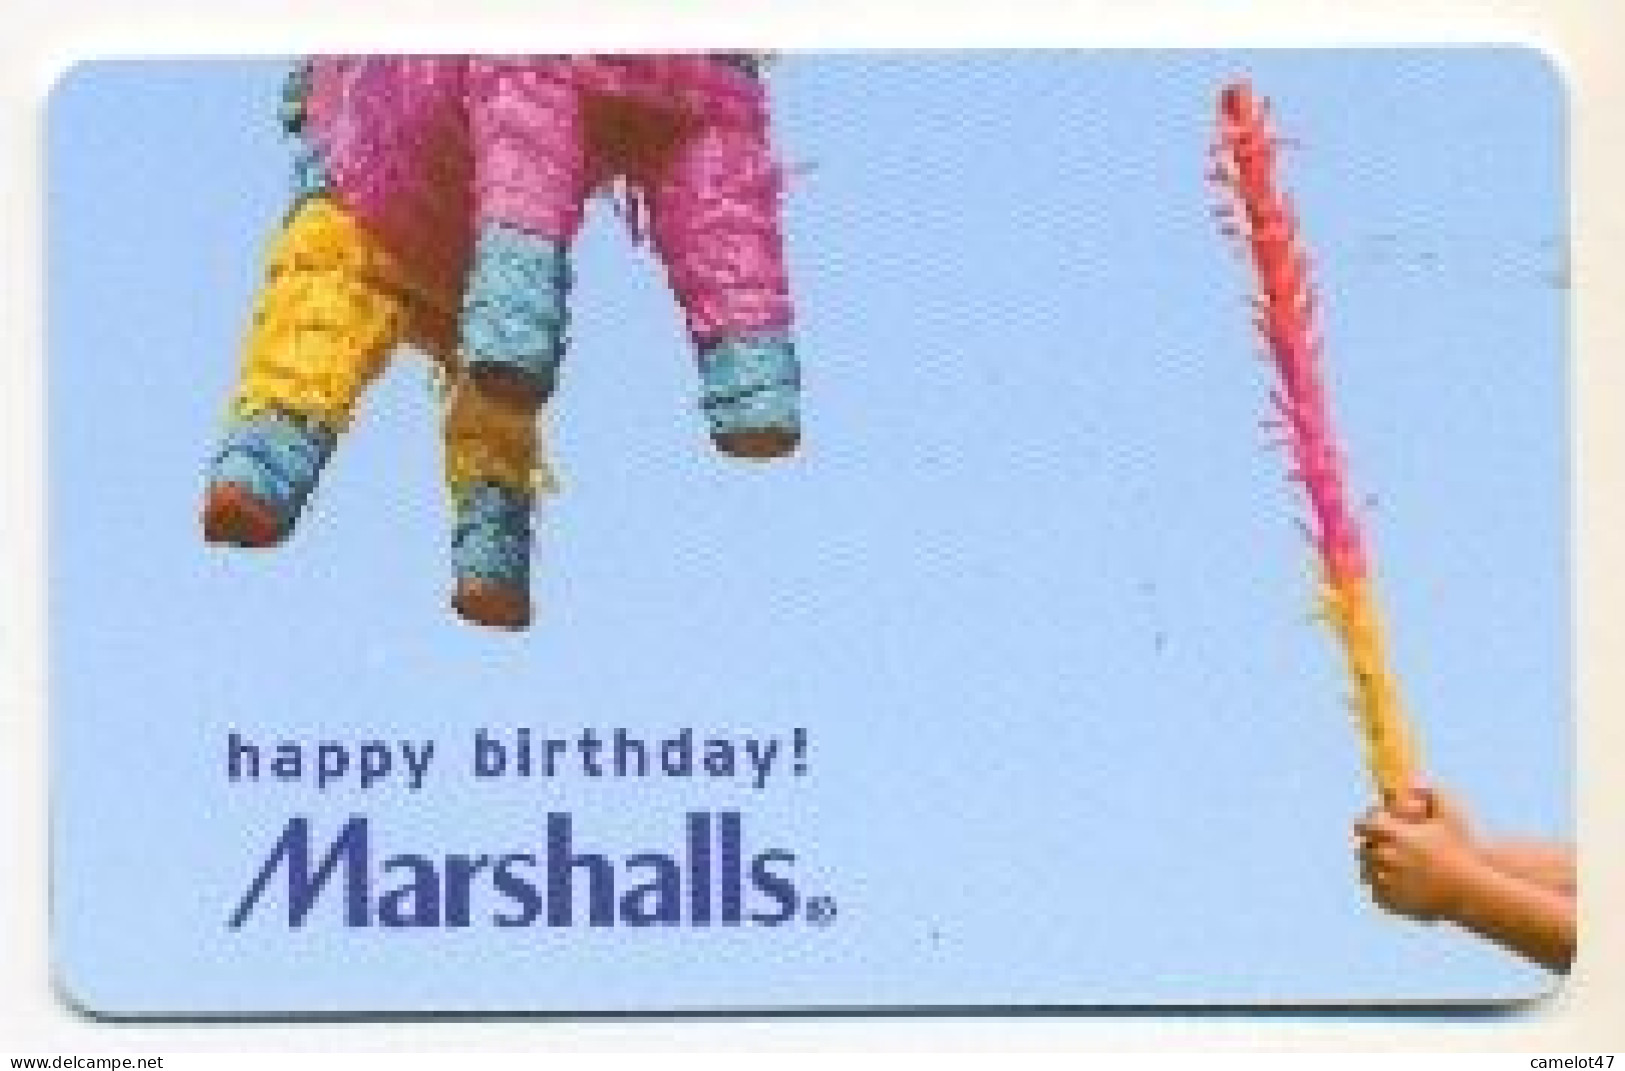 Marshalls, U.S.A., Carte Cadeau Pour Collection, Sans Valeur, # Marshalls-29 - Gift And Loyalty Cards